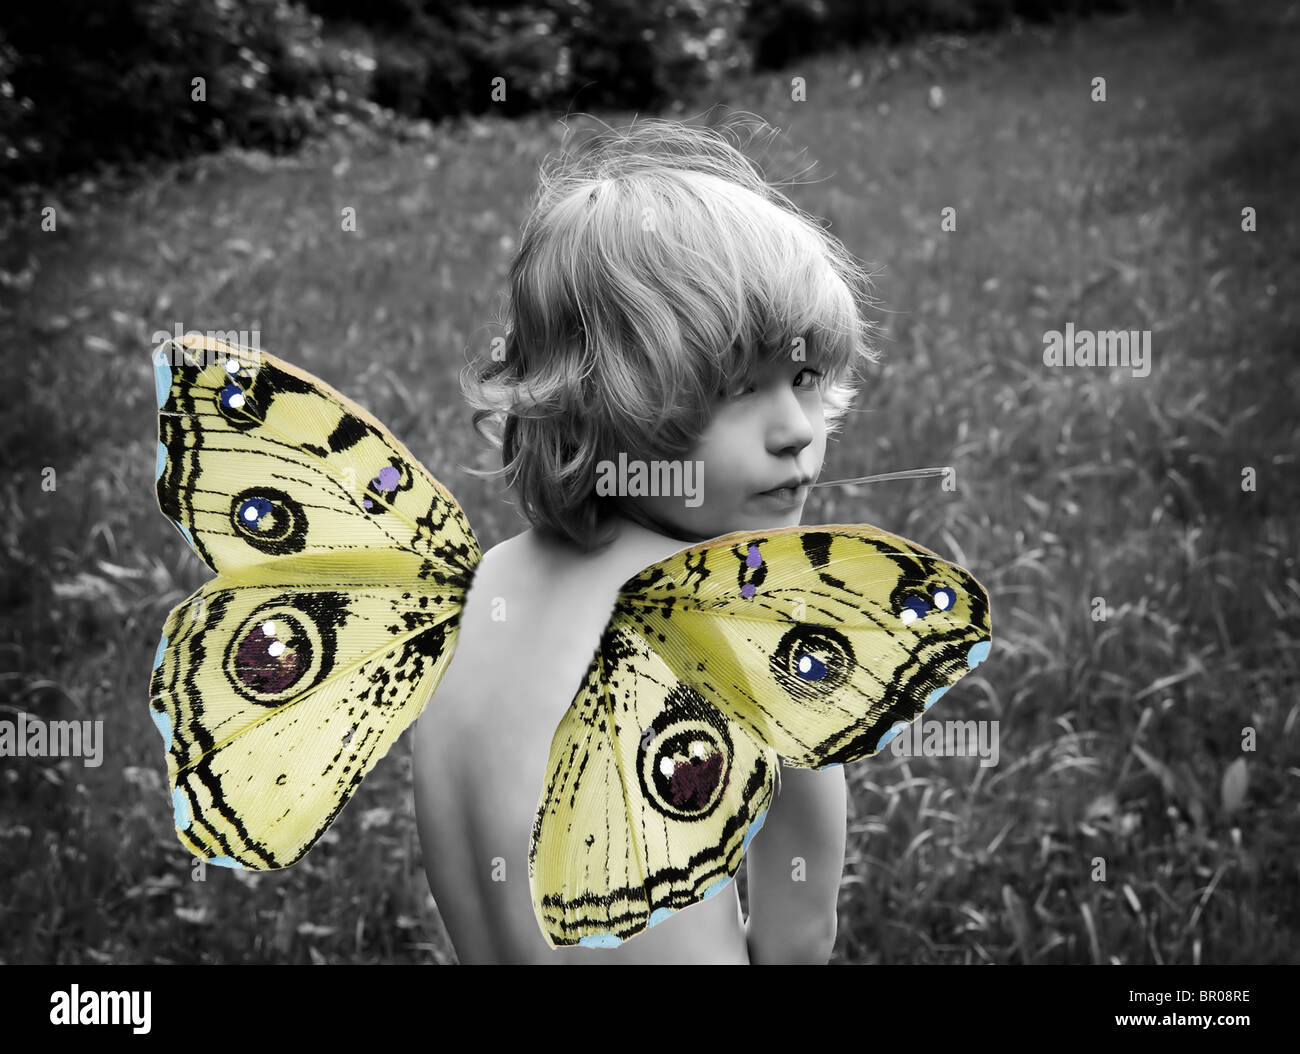 Child with butterfly wings Stock Photo